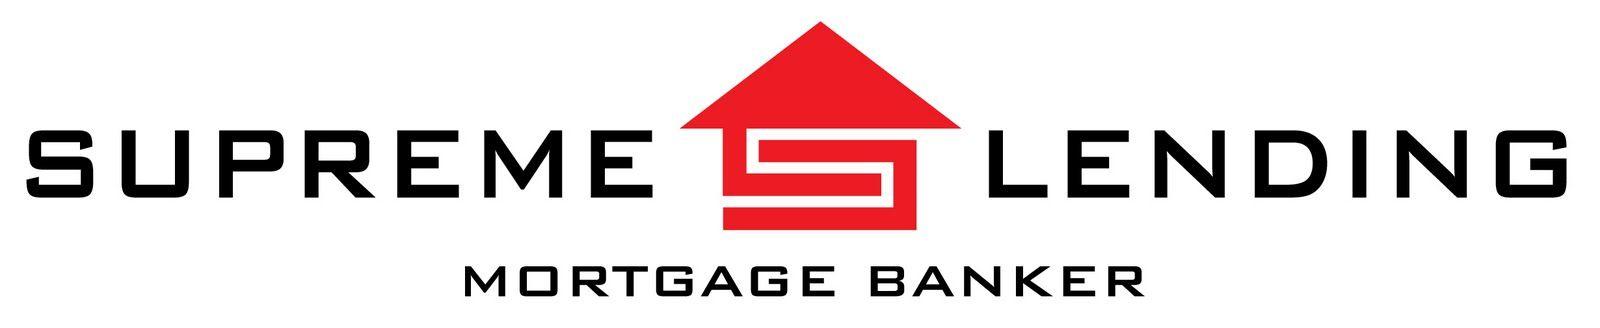 Supreme Lending Mortgage Logo - Supreme Lending Adds Brian Mitchell to Lead National Sales